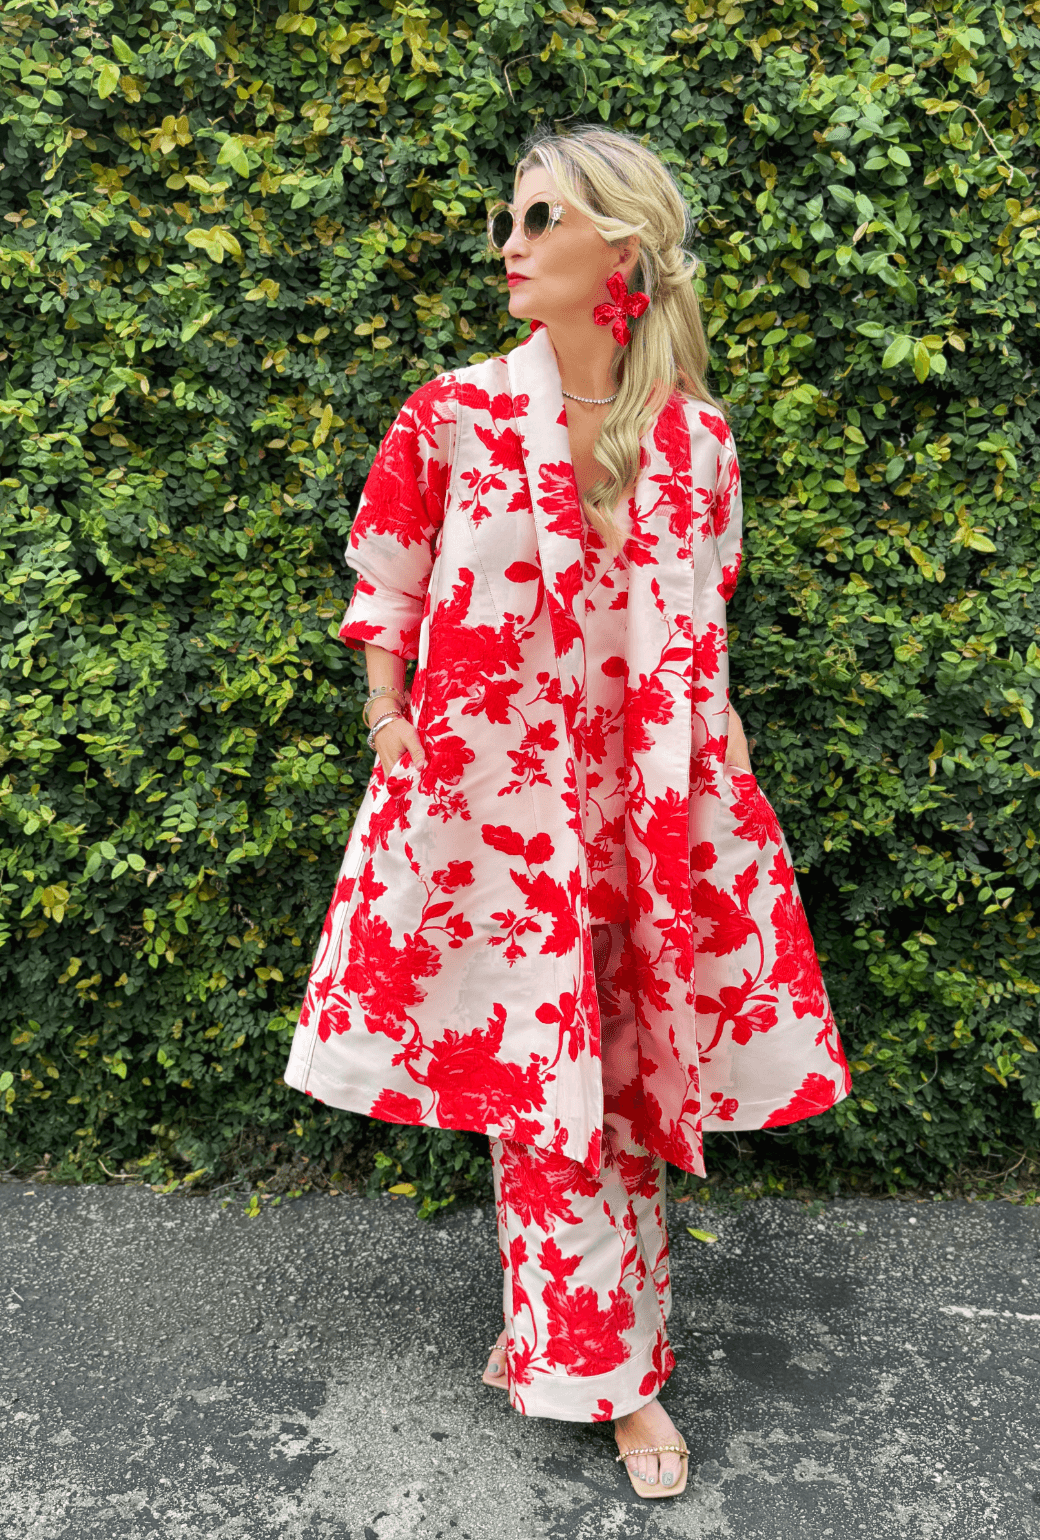 Belted Swing Coat - Run for the Roses Brocade